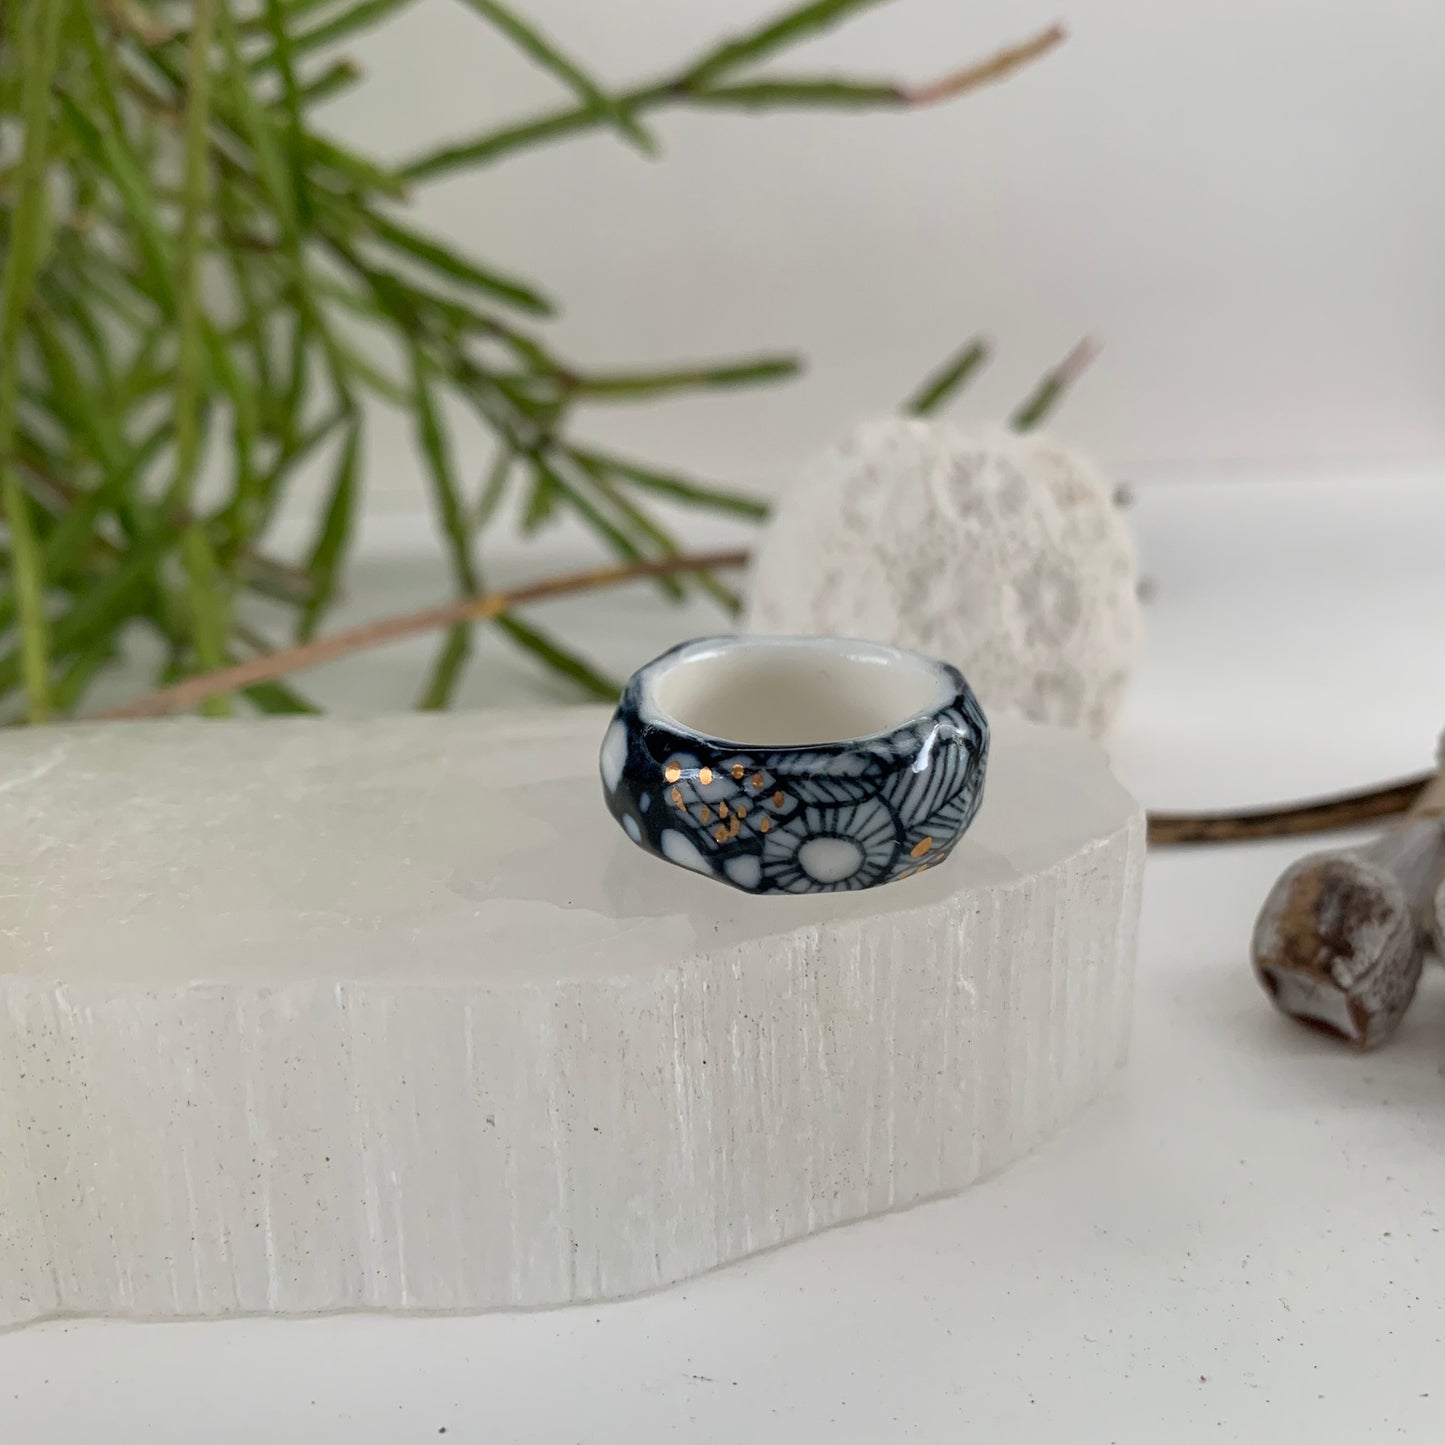 One blue and white ‘seafoam’ band ring